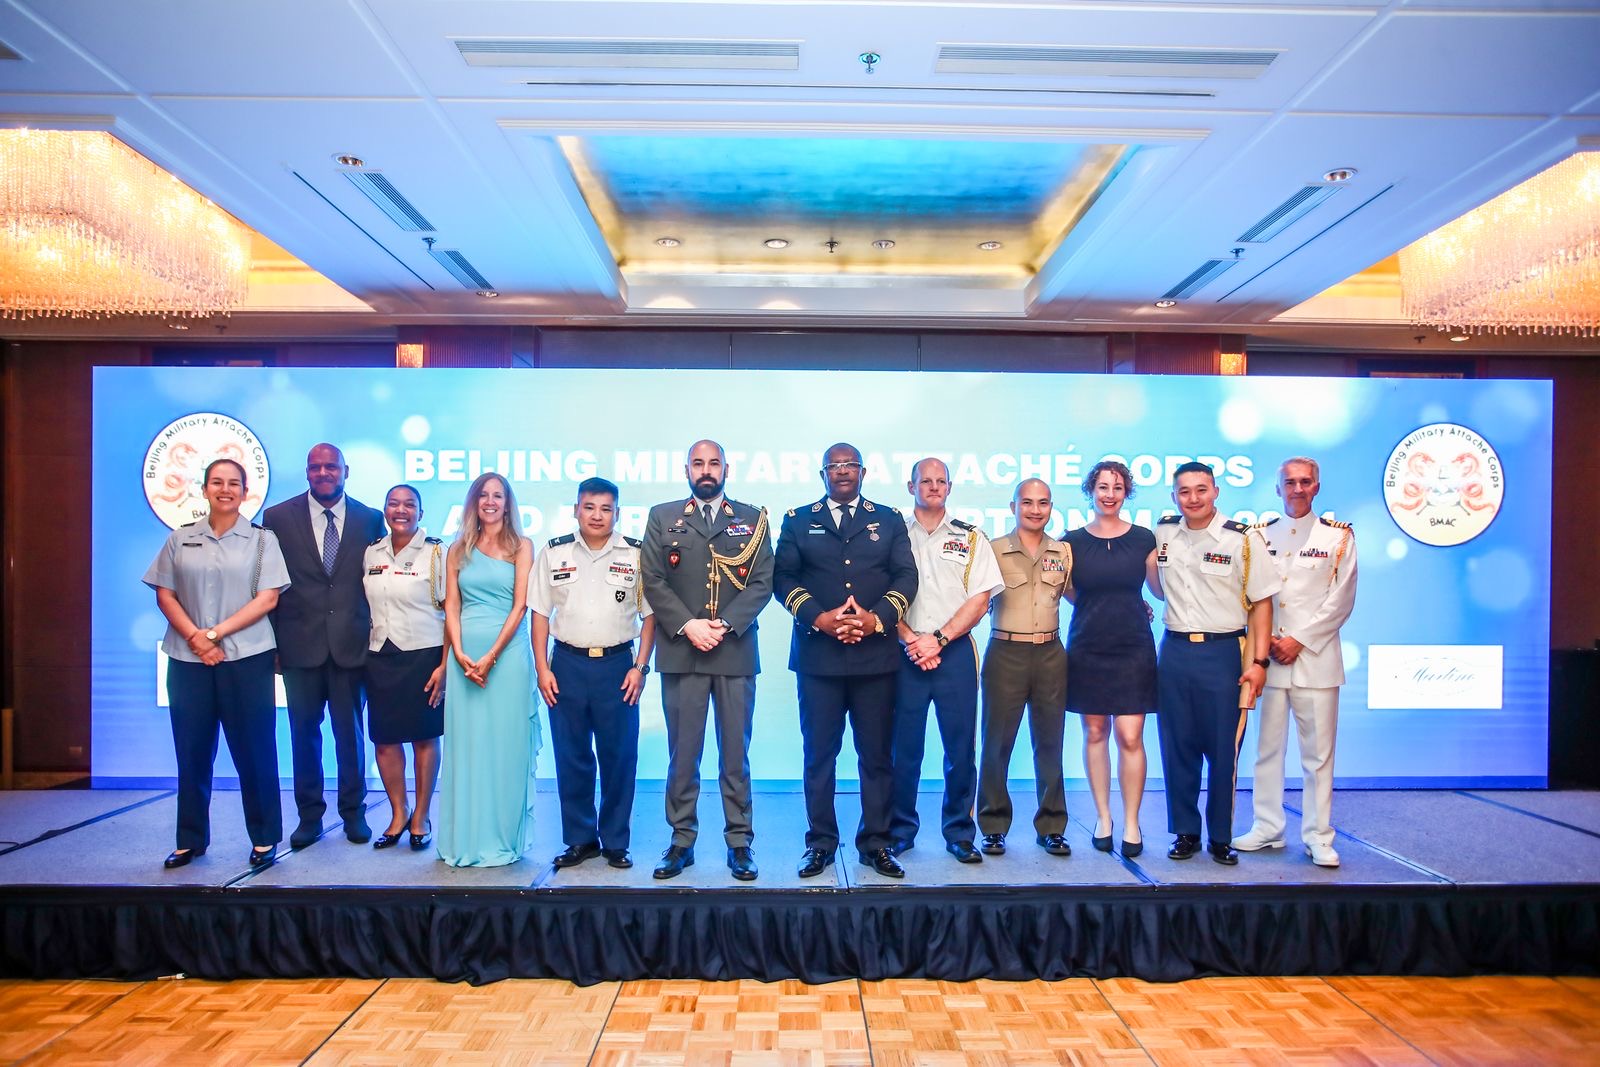 Hail and Farawell ceremony for the Military Attachés of about fifty countries, newly arrived in China and those who have arrived at the end of their stay.